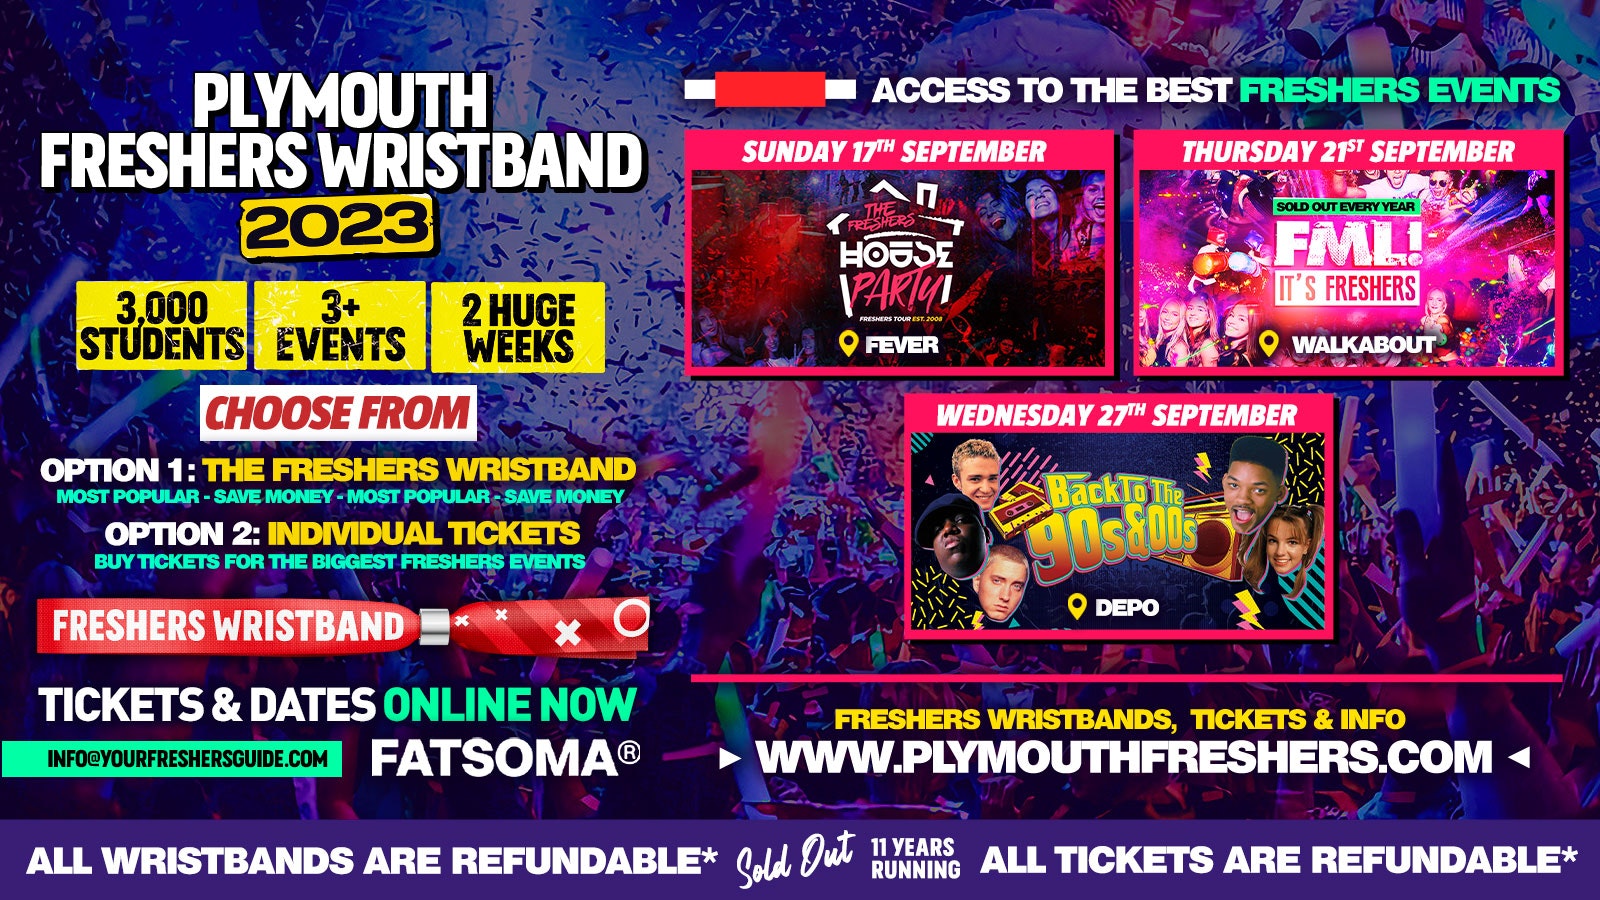 THE OFFICIAL 2023 PLYMOUTH FRESHERS WRISTBAND – ONLY £15 for 3 EVENTS 🔥 – The Biggest Events of Plymouth Freshers 2023 🎉